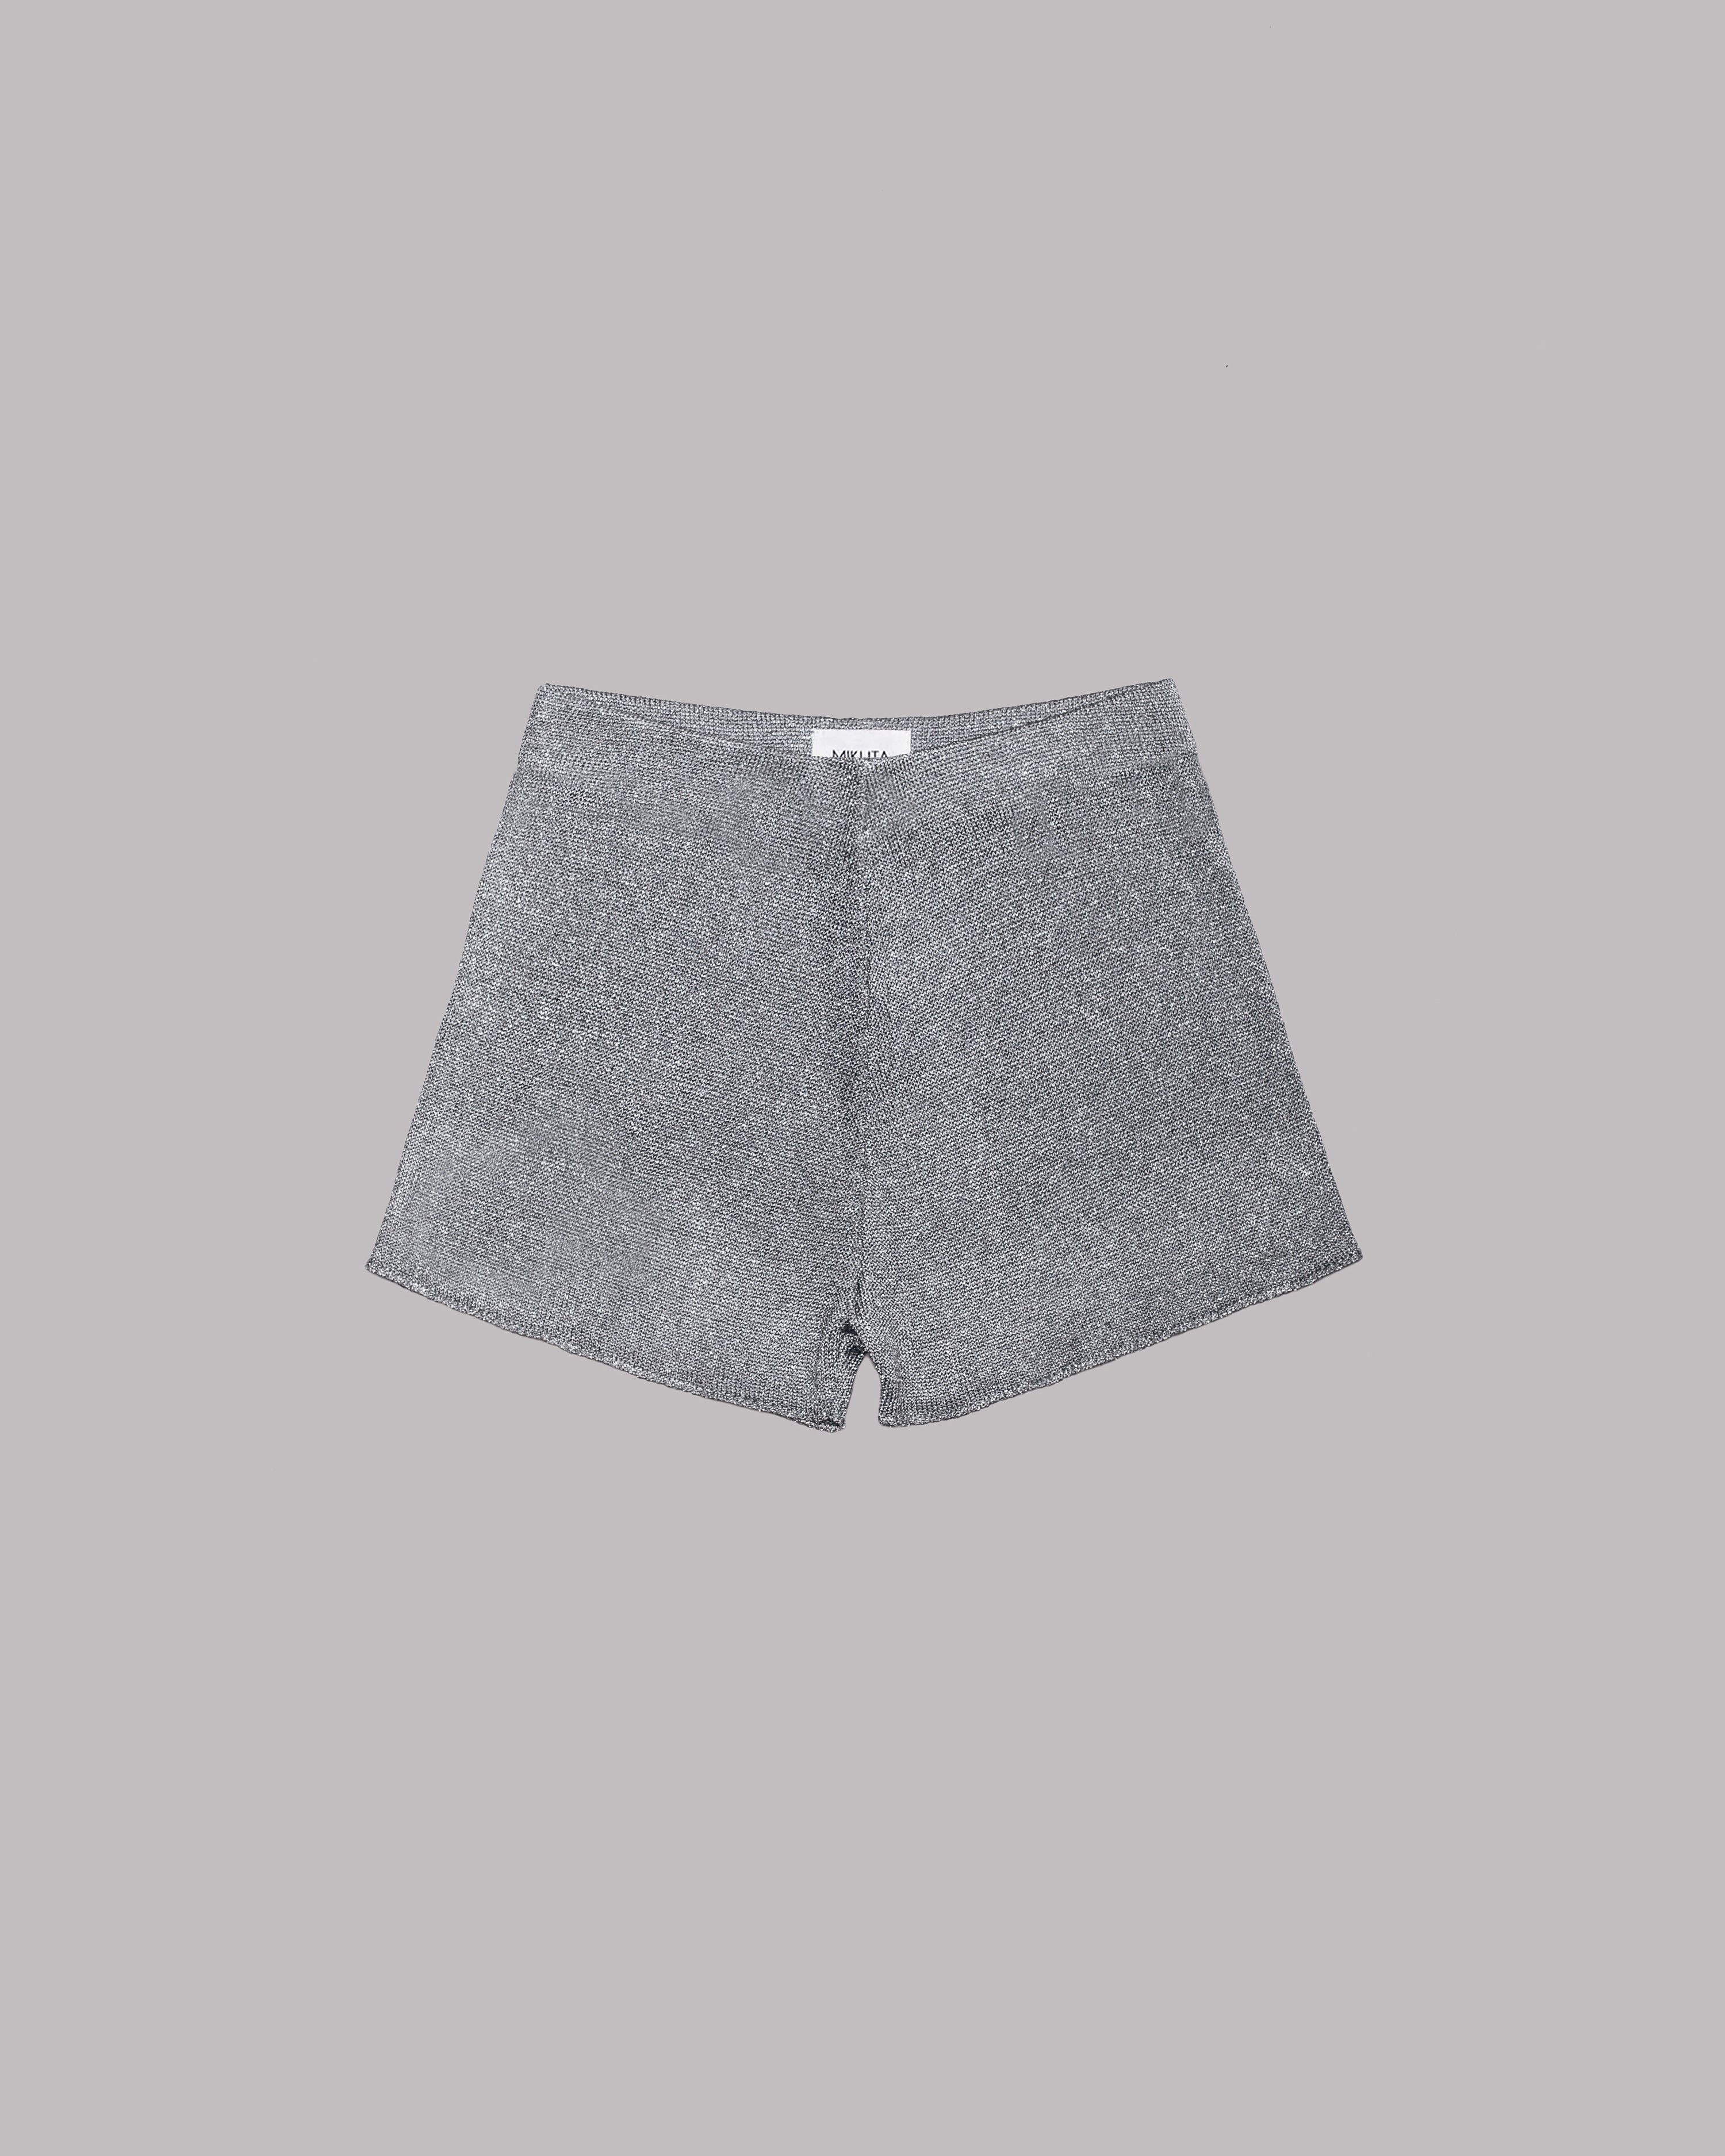 The Silver Sparkly Thin Knit Shorts